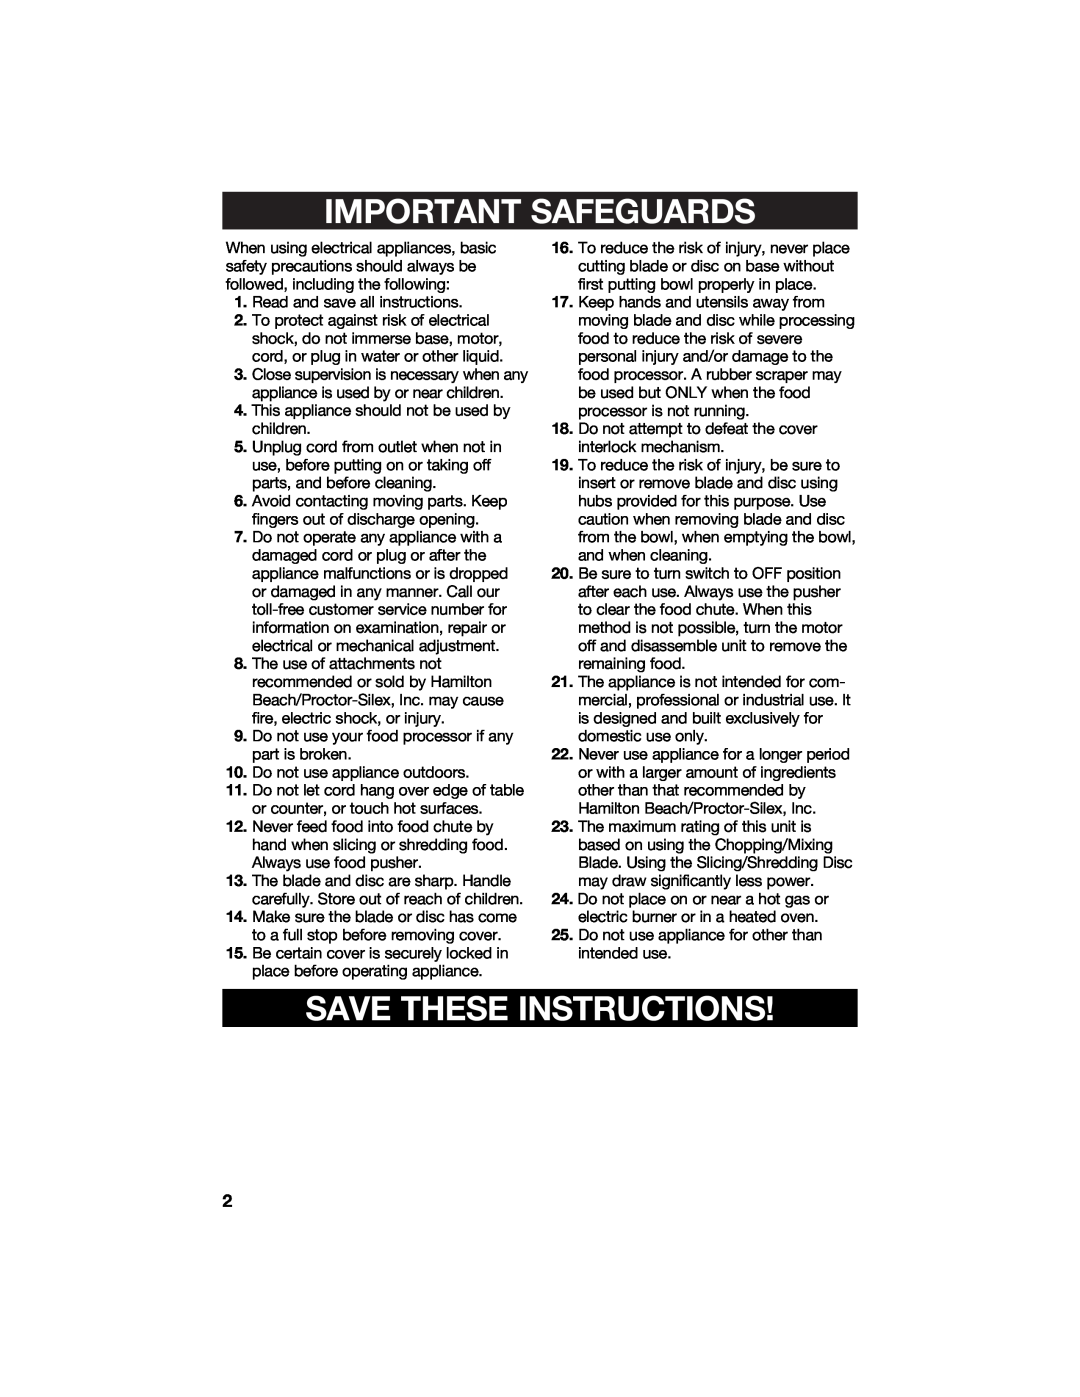 Hamilton Beach 840118100 manual Important Safeguards, Save These Instructions 